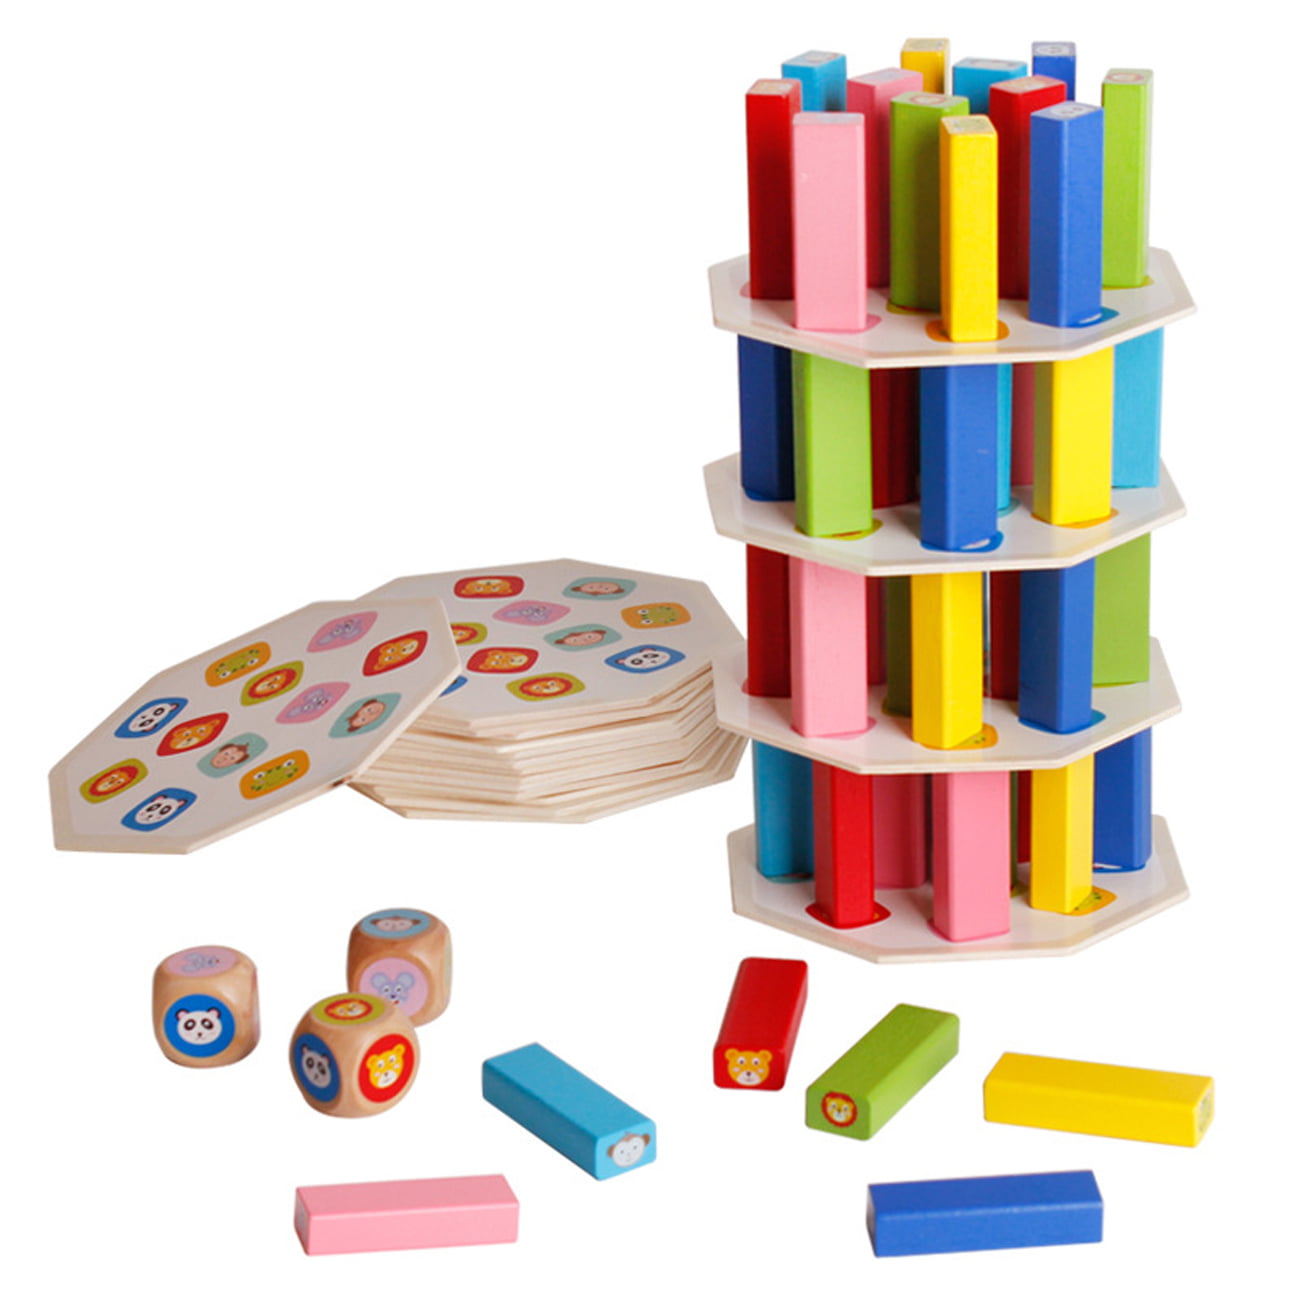 Details about   Classic Wooden Stacking Blocks Building Tower Game Educational Kids Toys 54pcs